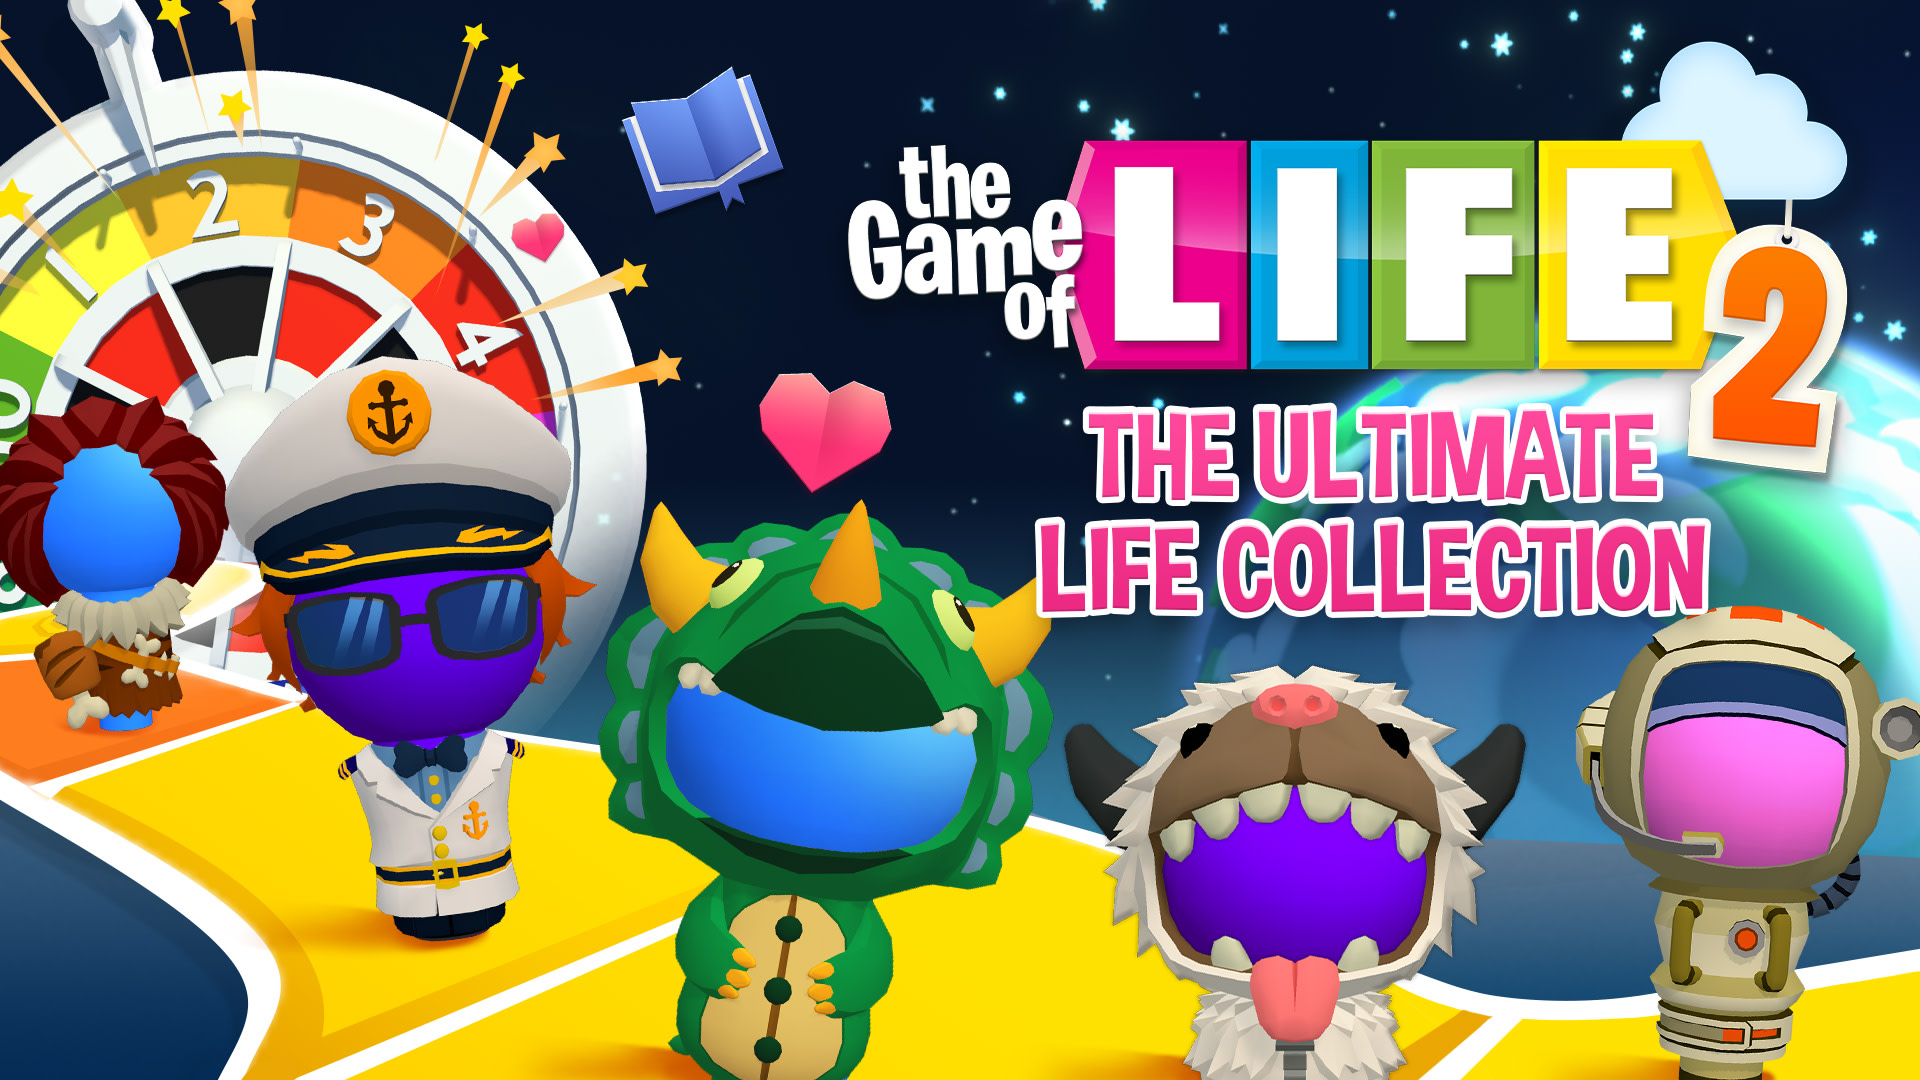 THE GAME OF LIFE 2 - The Ultimate Life Collection